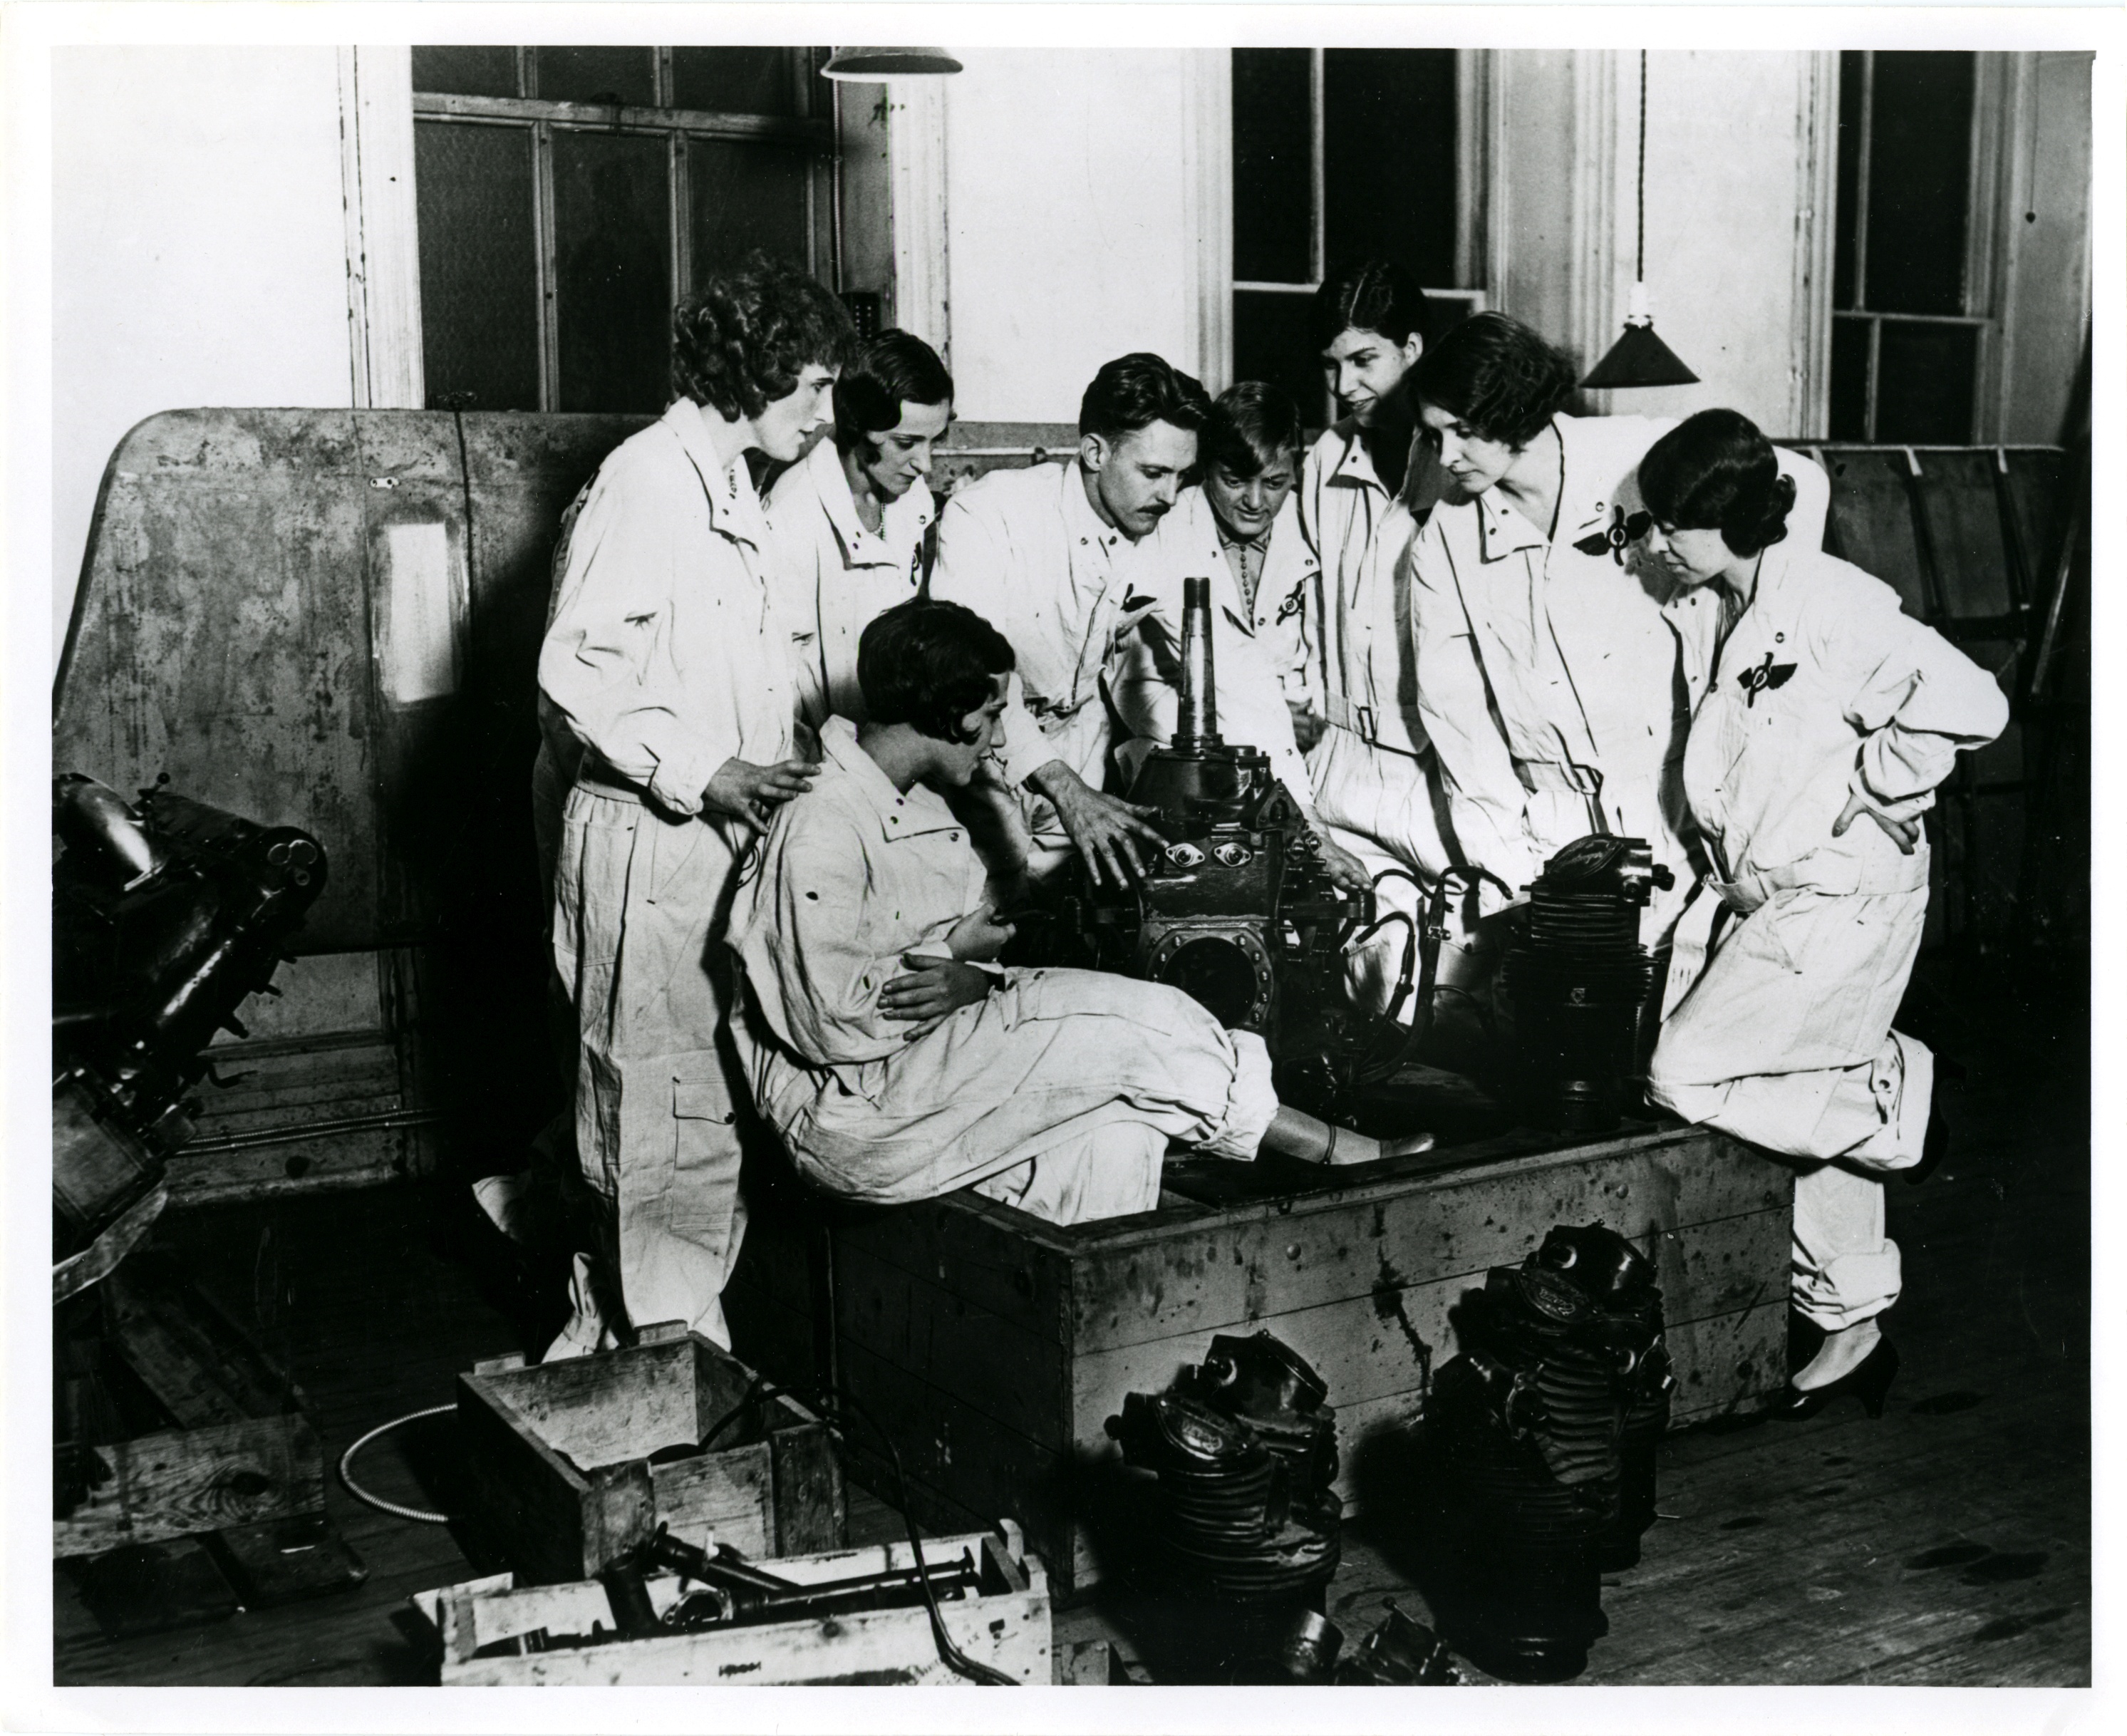 Group of women in flights suits gathered around men demonstrating the parts of an aircraft motor.